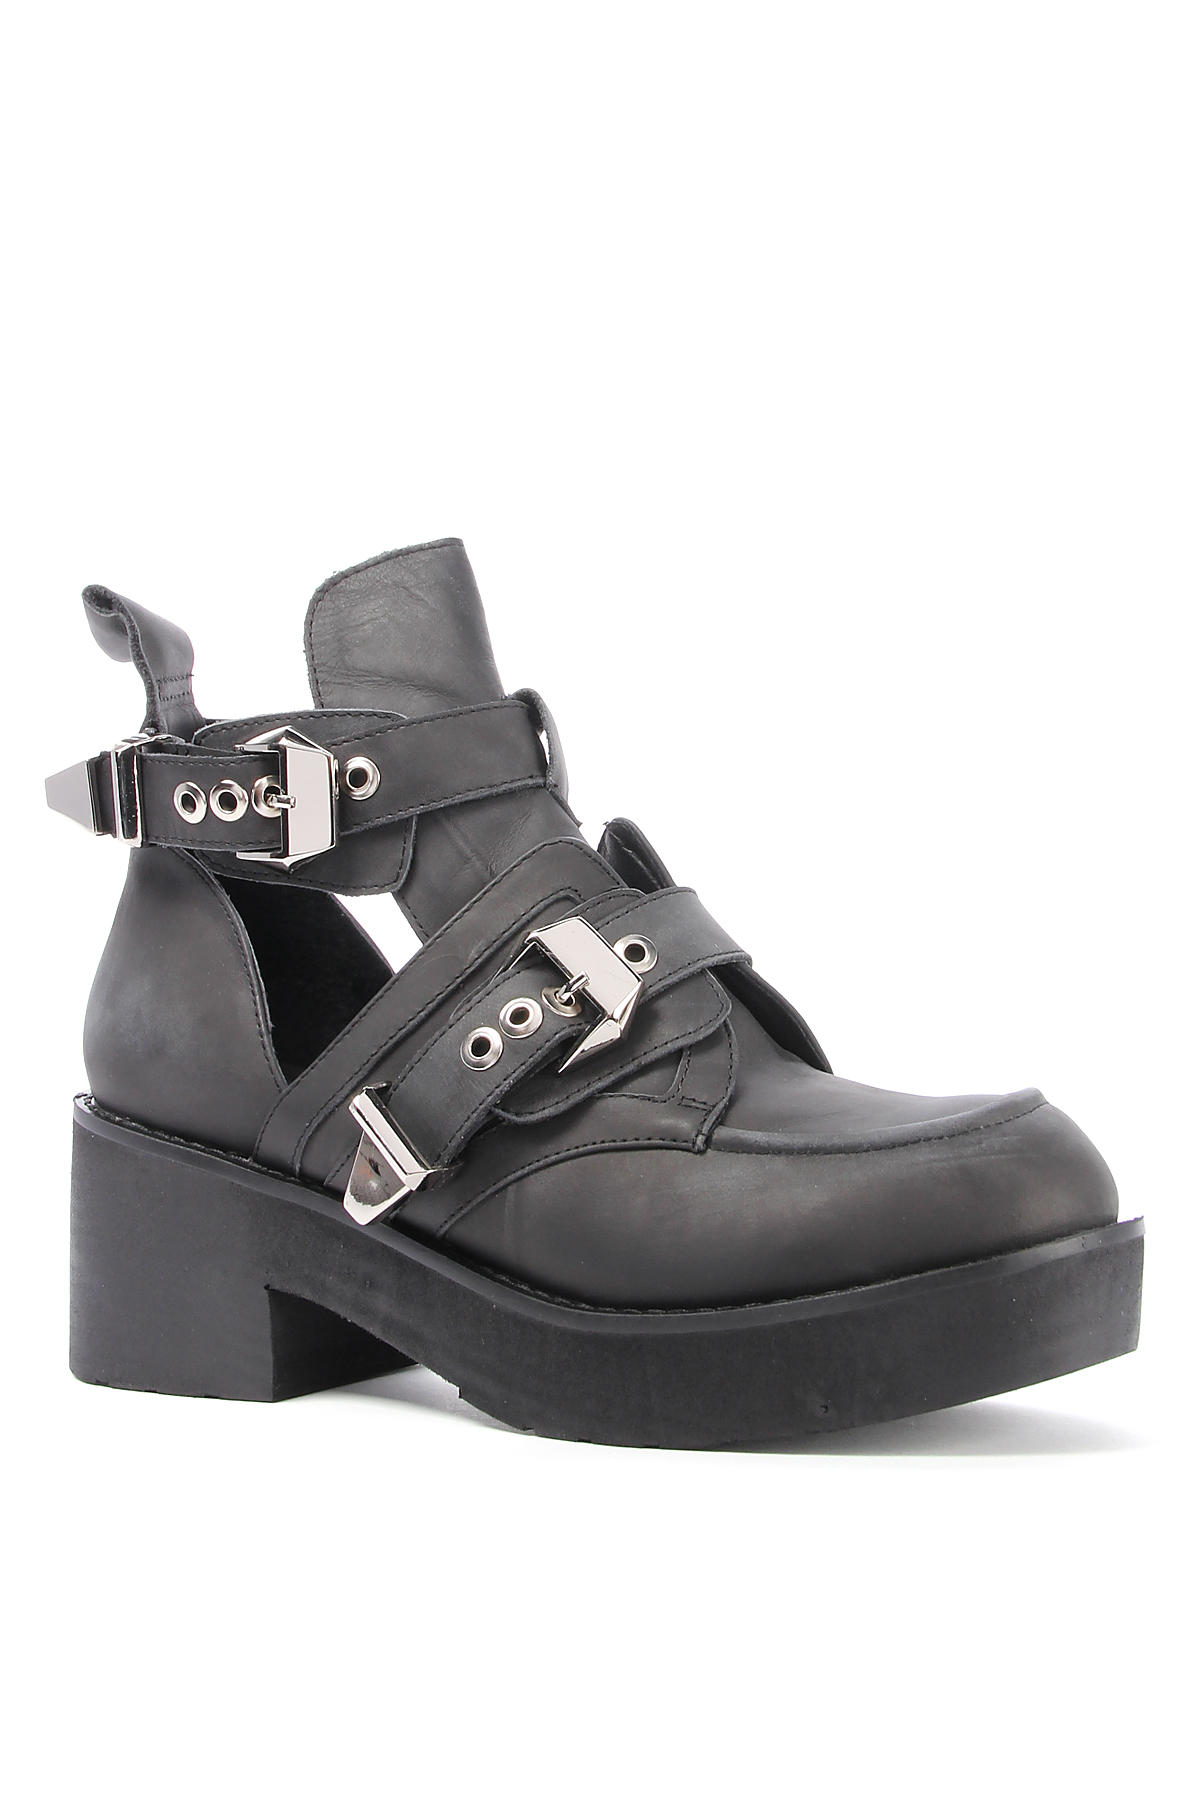 JEFFREY CAMPBELL The Coltrane Boot in Distressed Black COLTRANE-BLK - Karmaloop Jeffrey Campbell Coltrane Boots